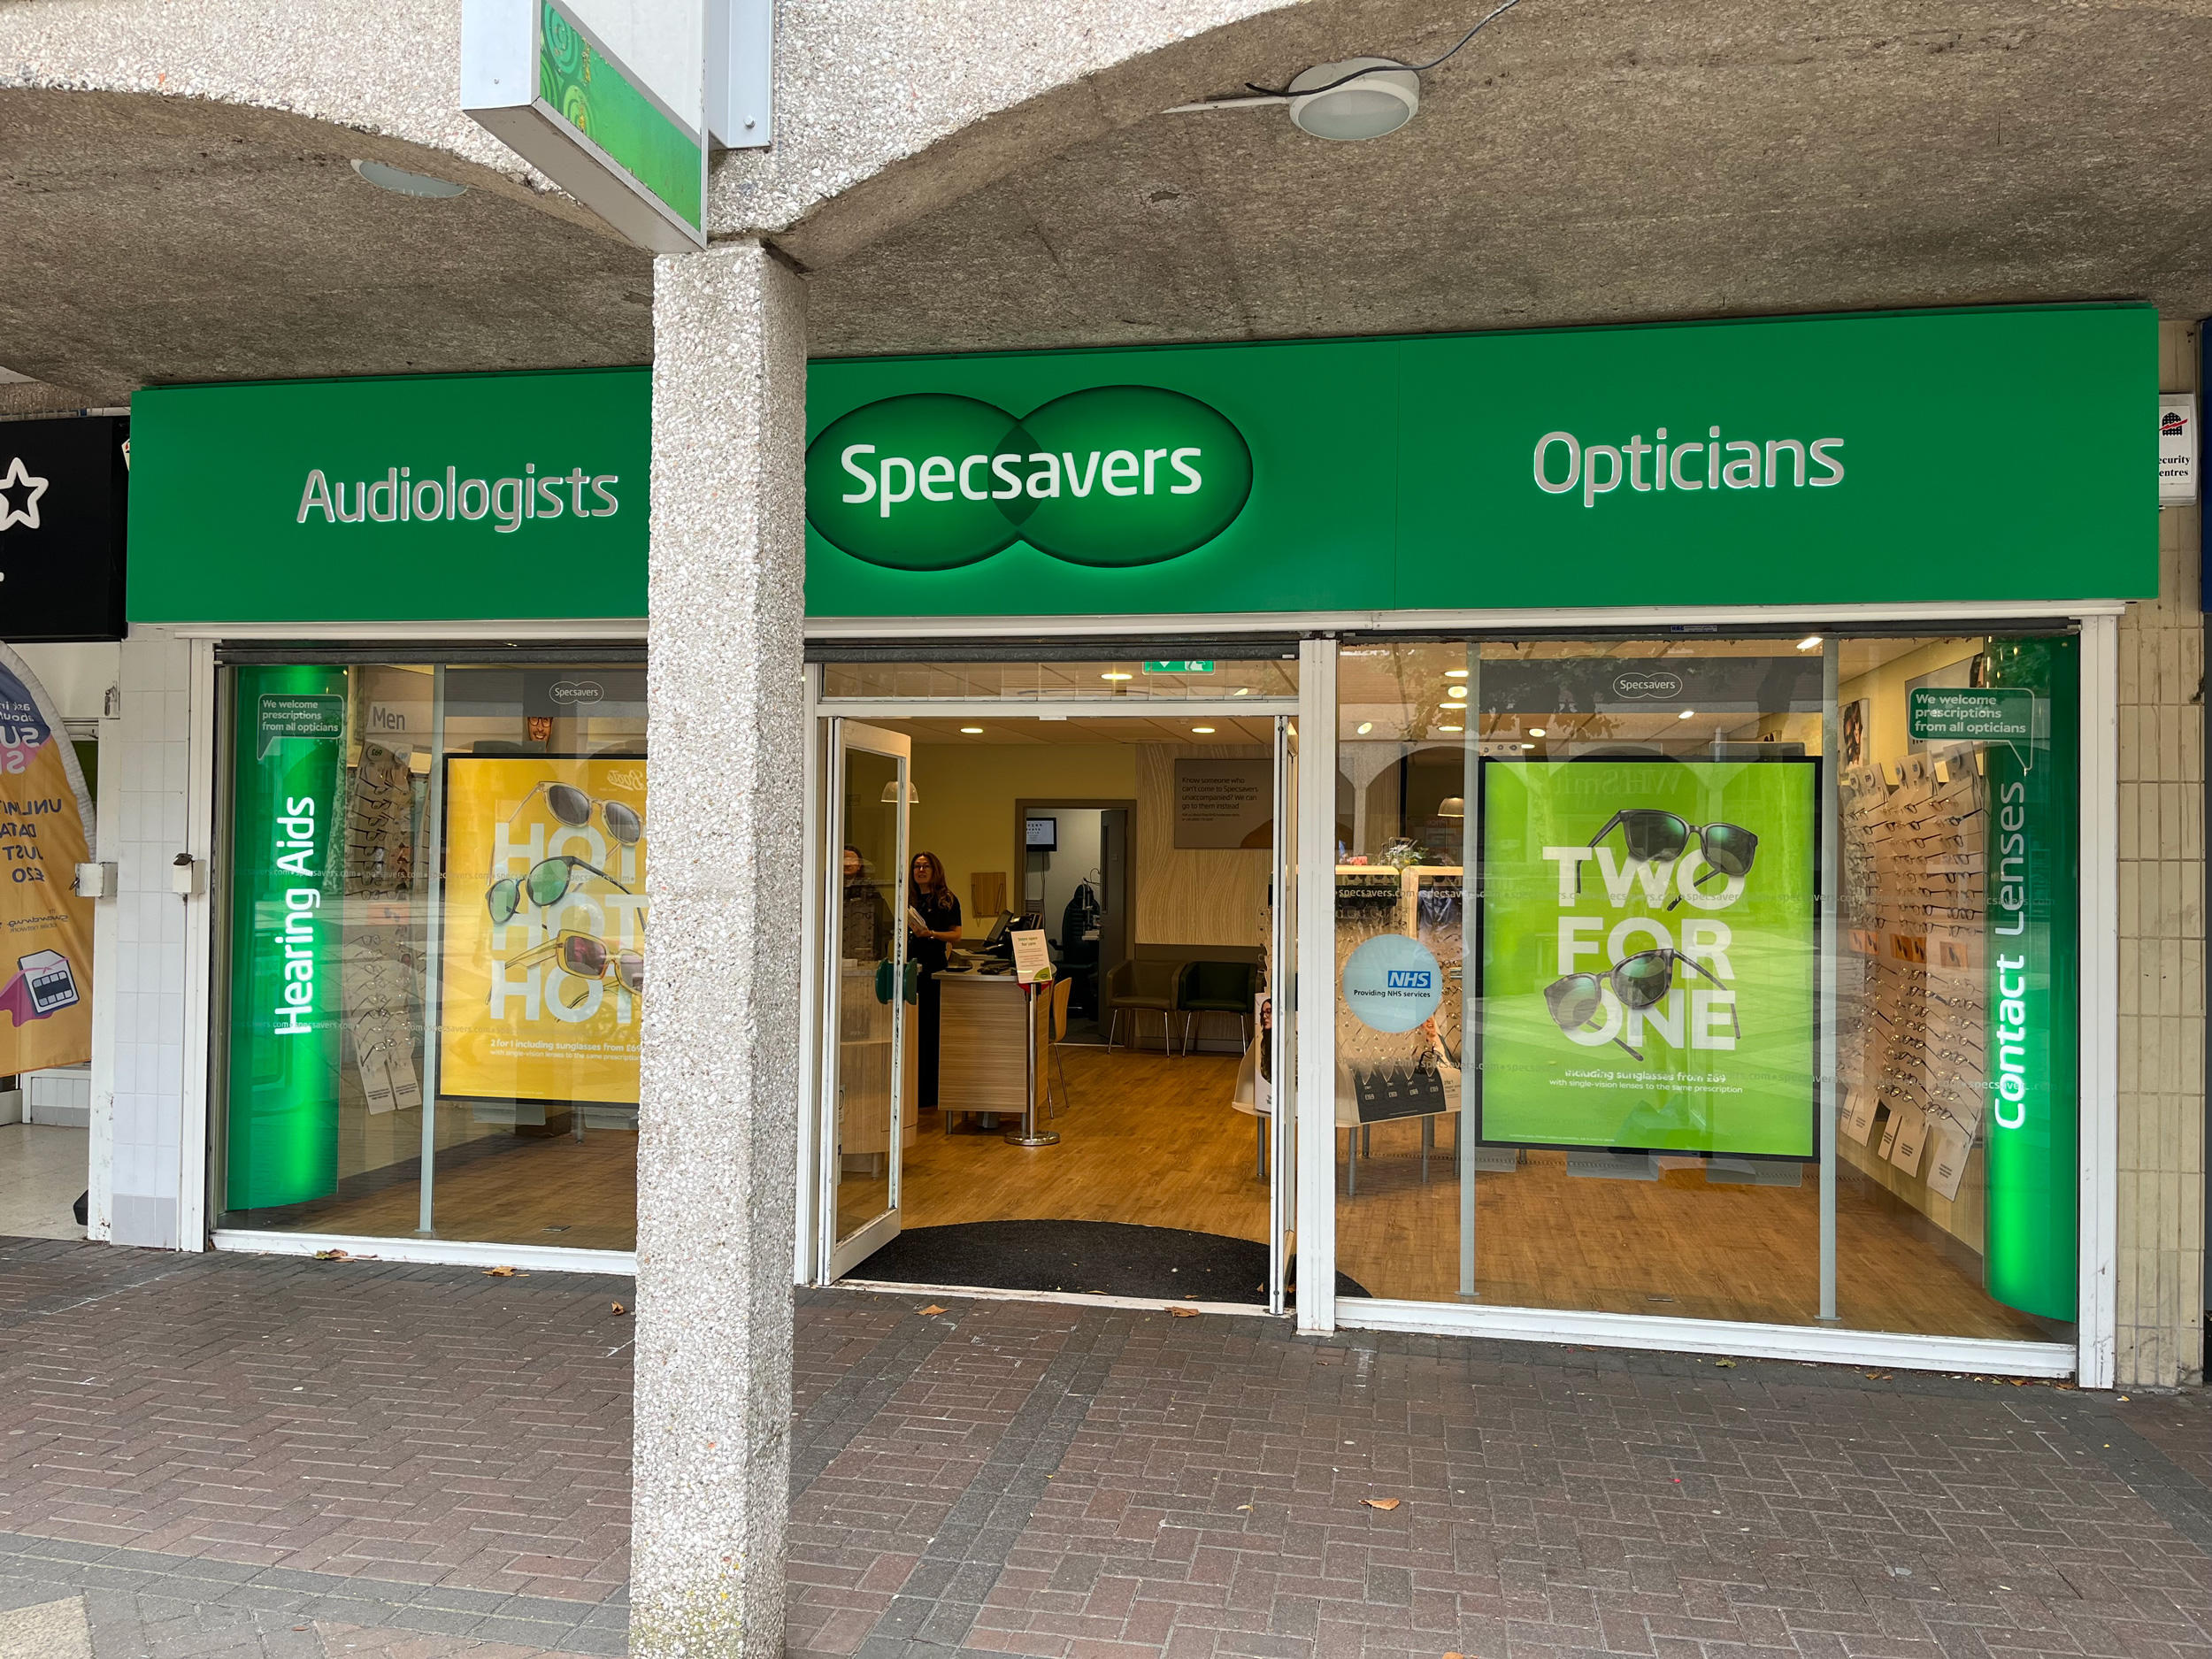 Images Specsavers Opticians and Audiologists - Nailsea